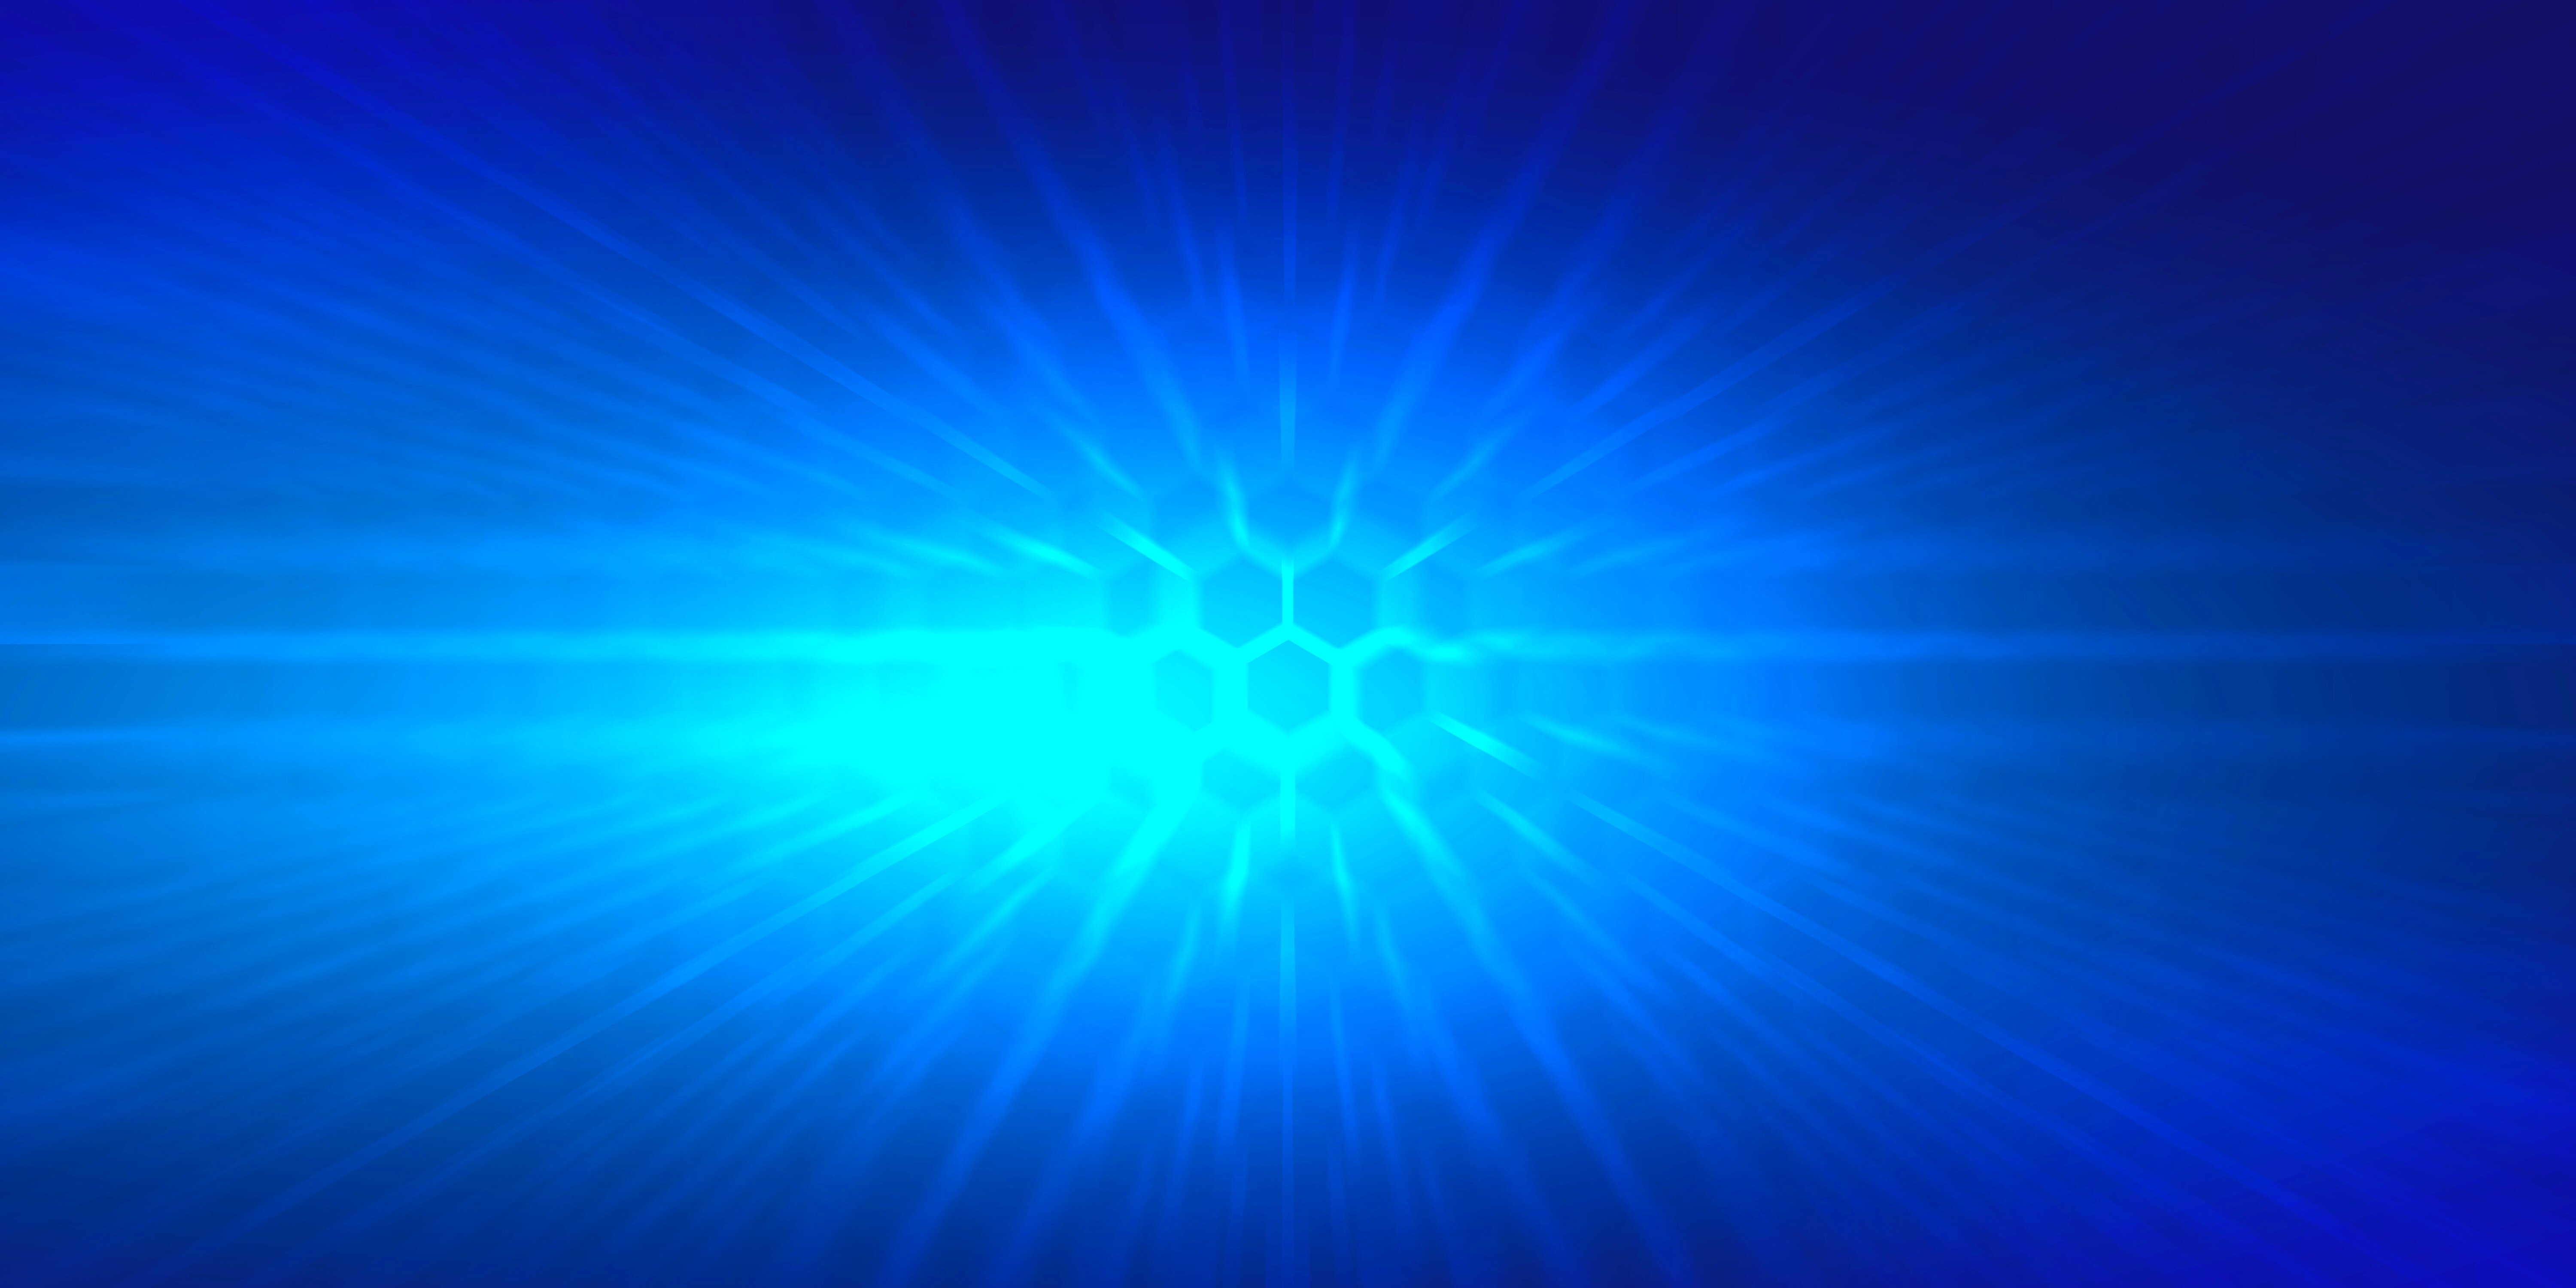 Abstract blurry blue rectangles background wallaper illustrated